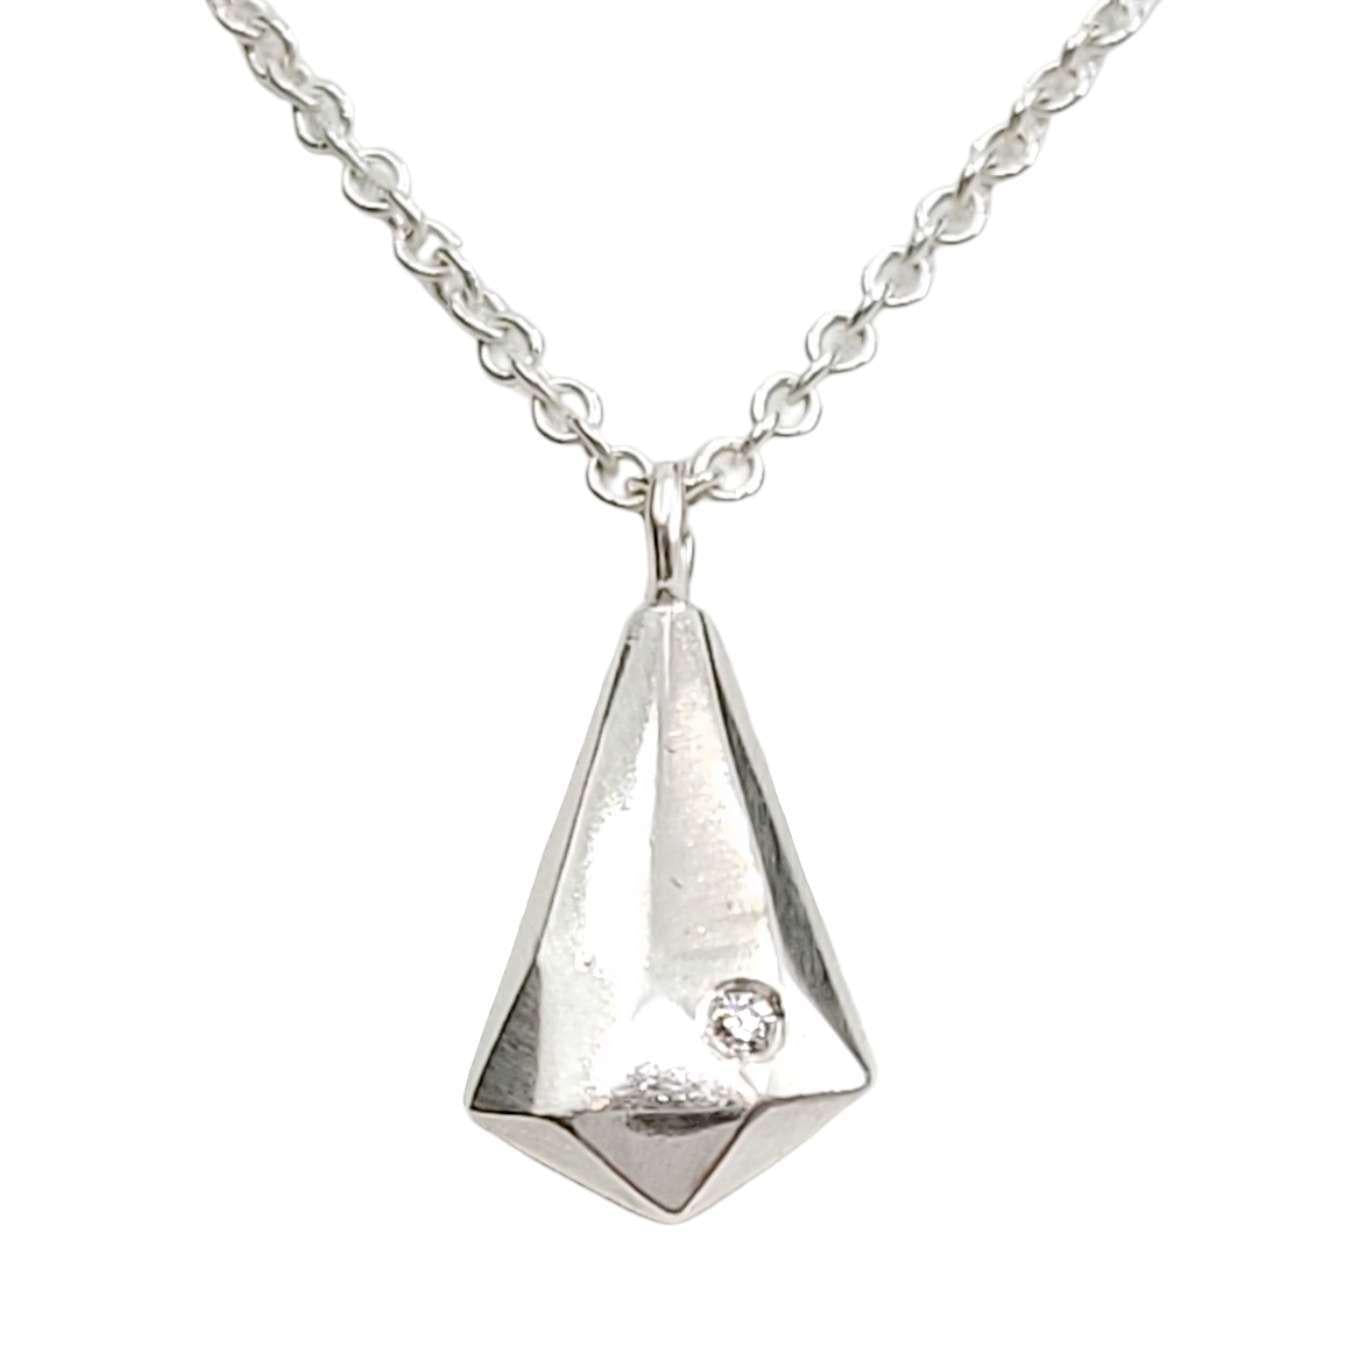 Necklace - Crystal Fragment Pendant in Sterling Silver and Diamond by Corey Egan